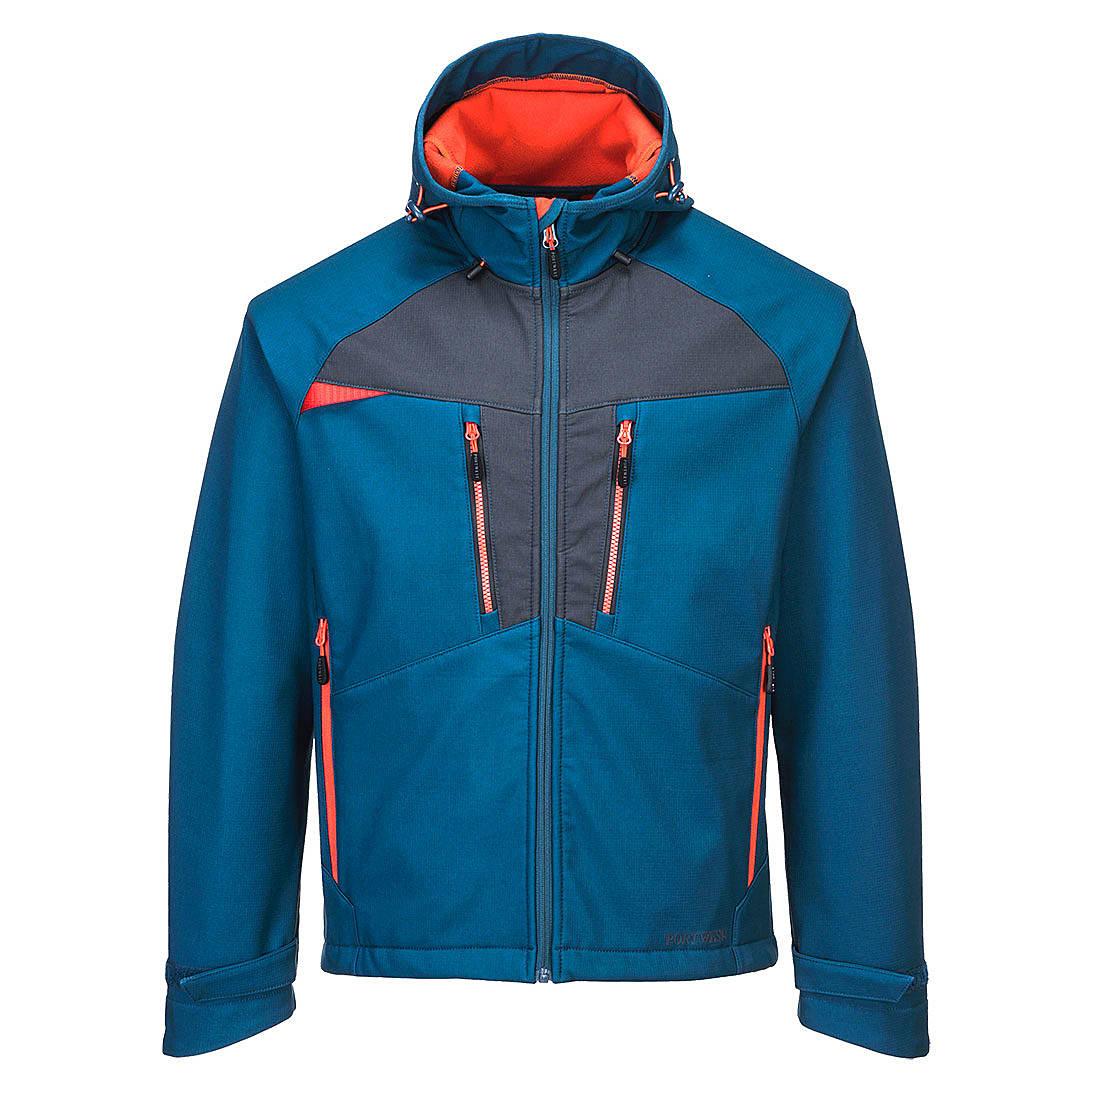 Portwest DX4 Softshell Jacket in Metro Blue (Product Code: DX474)